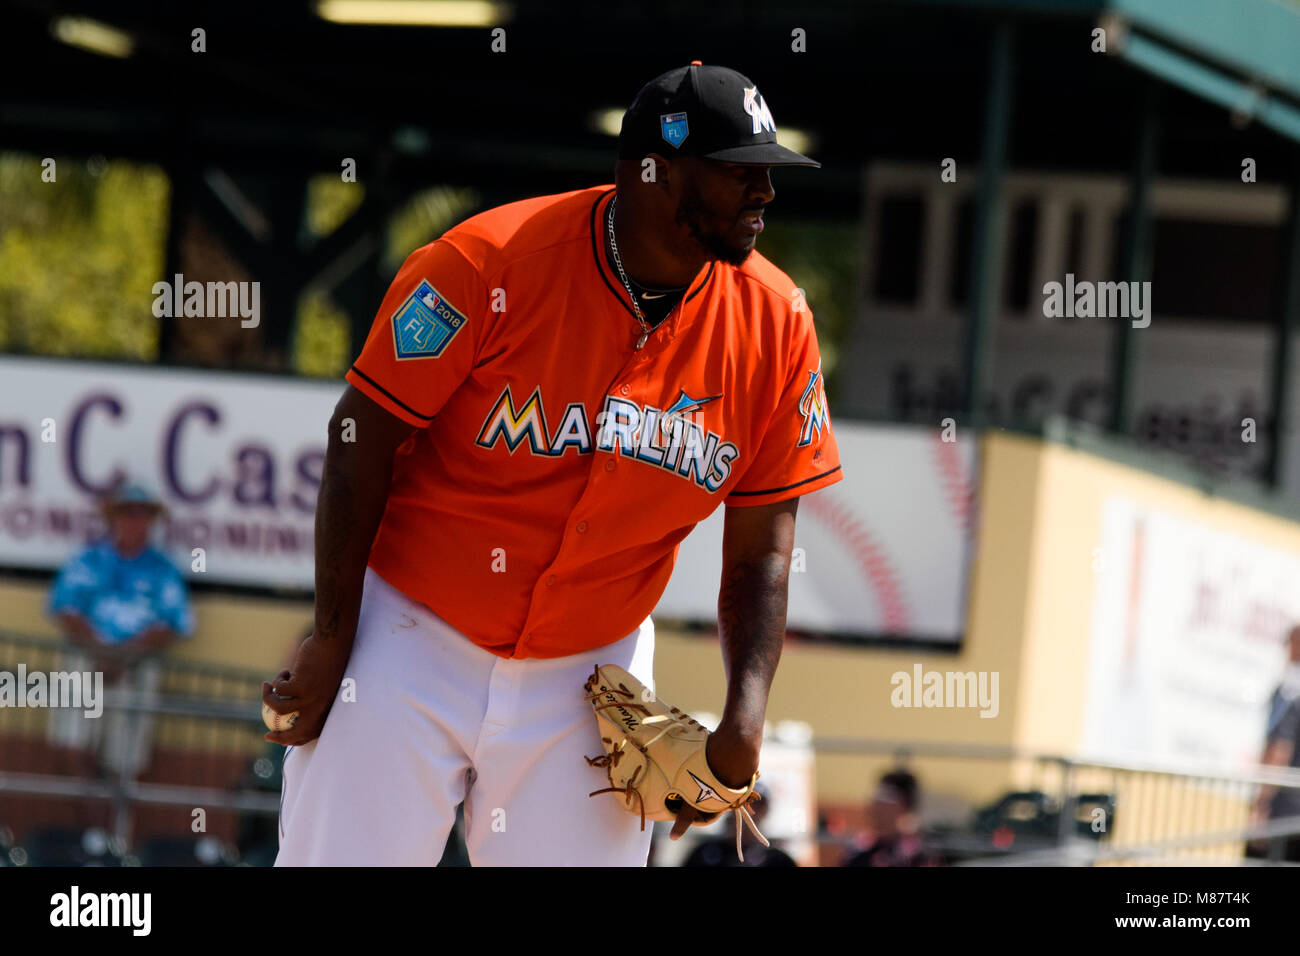 Jumbo Diaz relieved Conley after his departure from the match for the inconvenience obtained during his opening. Miami Marlins played St. Louis Cardinals on 6th and fthe final score was 4-4. Stock Photo